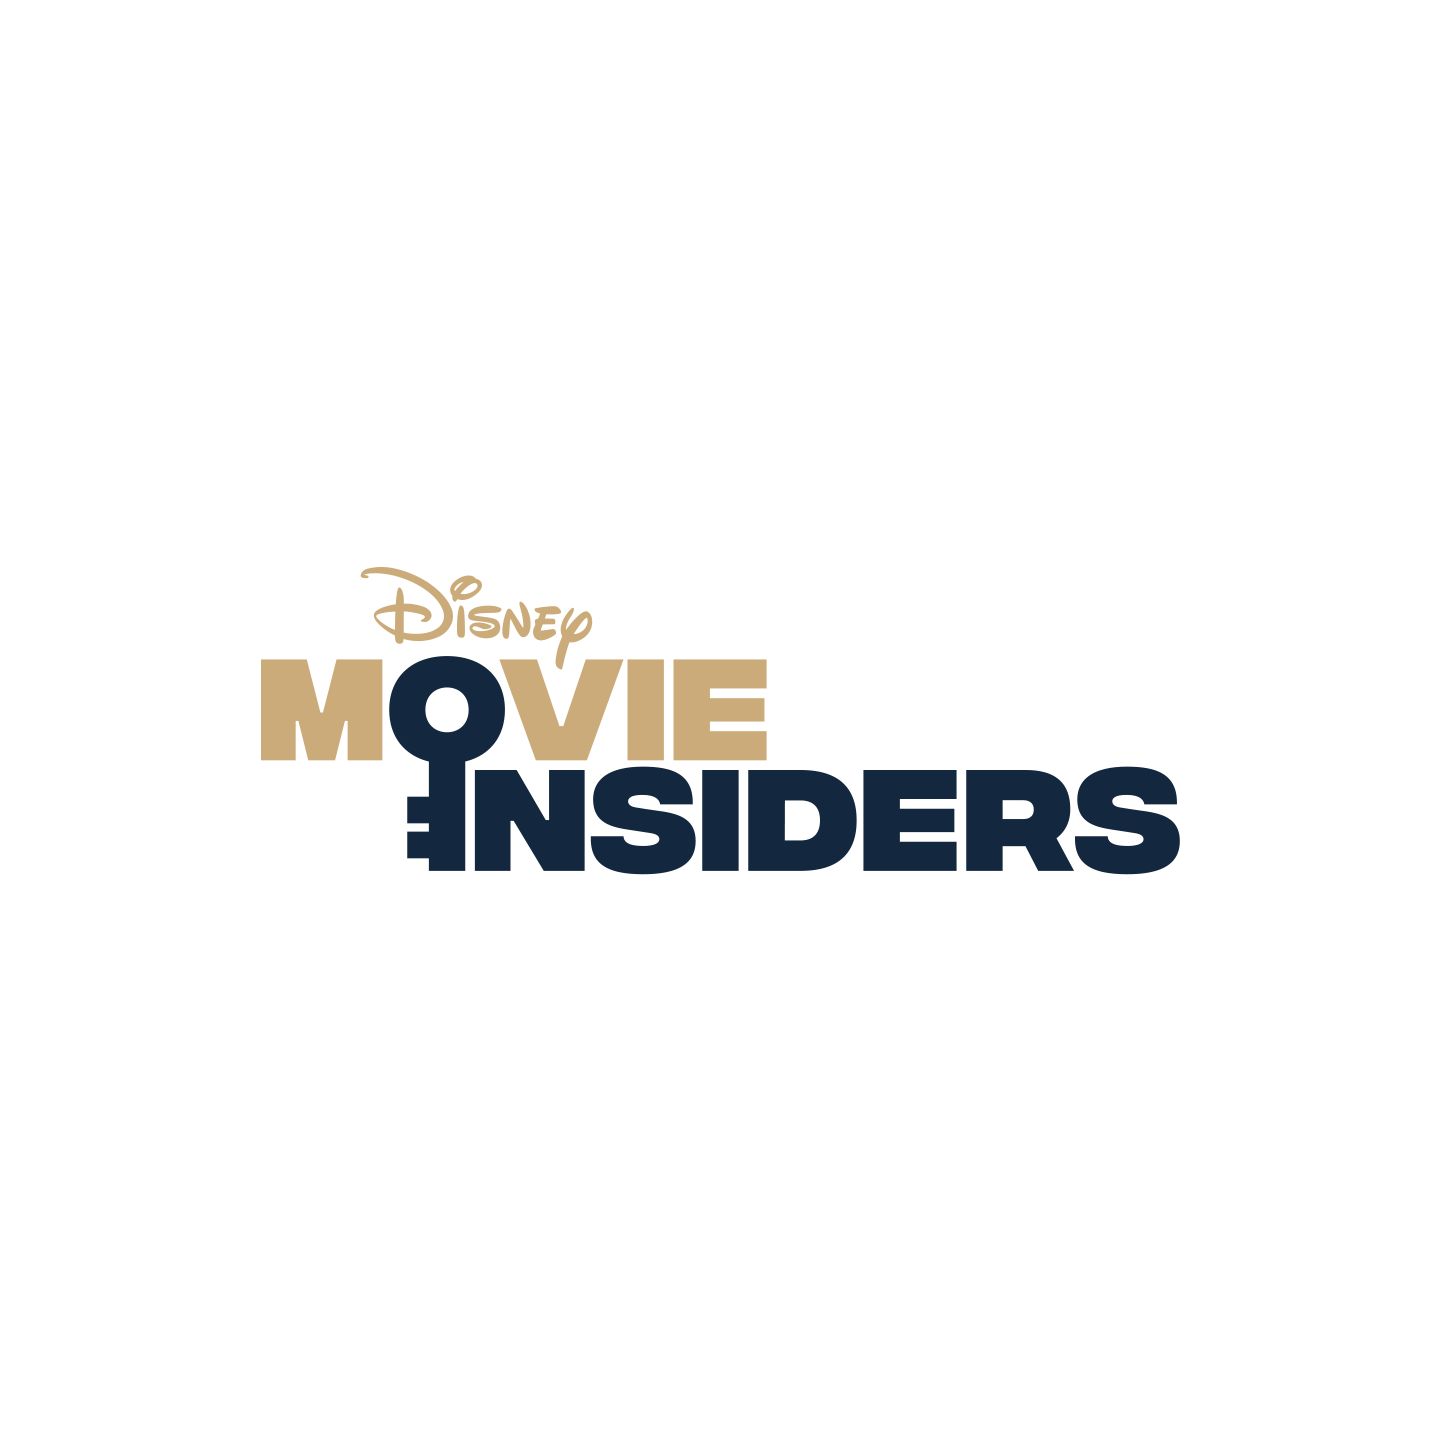 THE WALT DISNEY STUDIOS TOUR - The Ultimate Insiders Experience! Available on 7/13